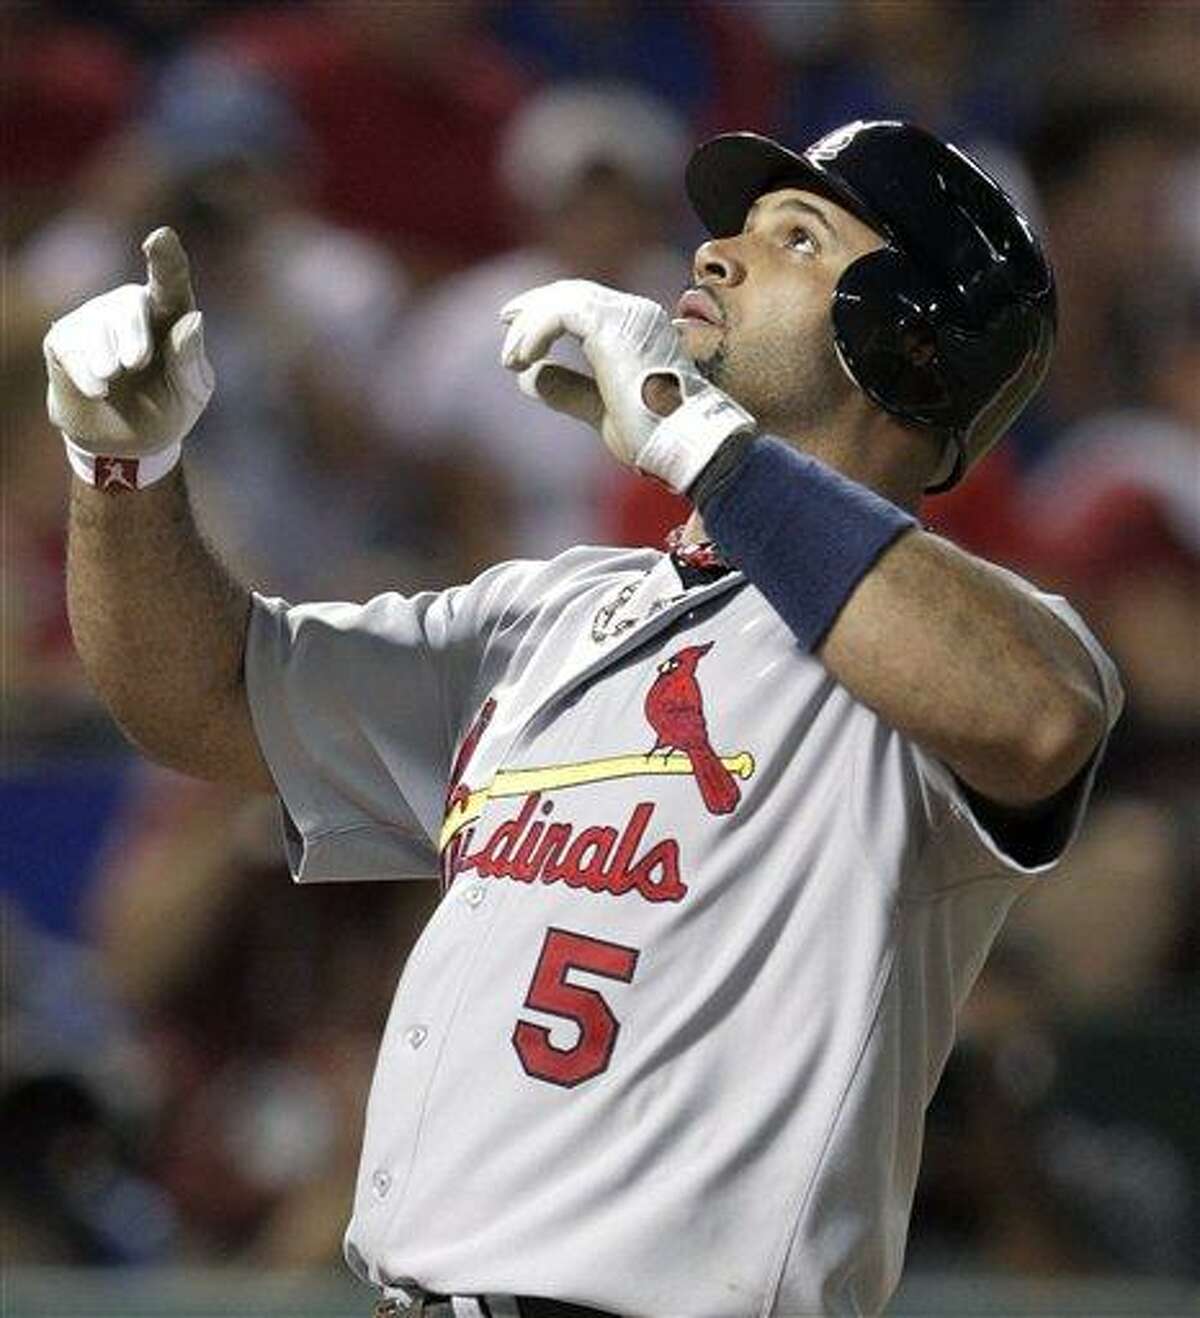 Cardinals' Albert Pujols becomes 4th player in MLB history to hit